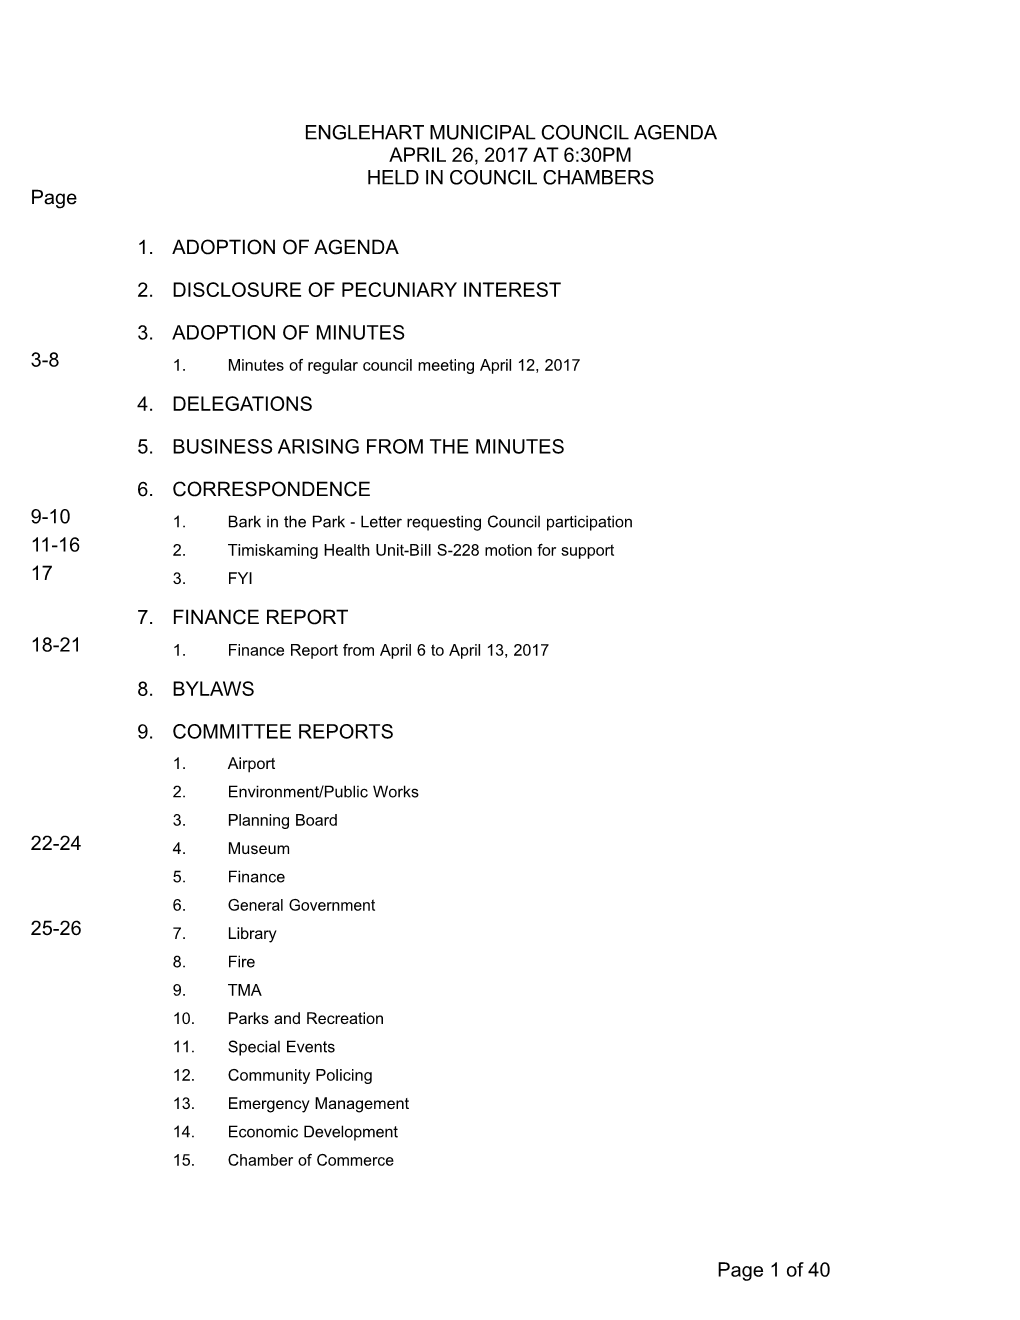 ENGLEHART MUNICIPAL COUNCIL AGENDA APRIL 26, 2017 at 6:30PM HELD in COUNCIL CHAMBERS Page 1. ADOPTION of AGENDA 2. DISCLOSURE OF